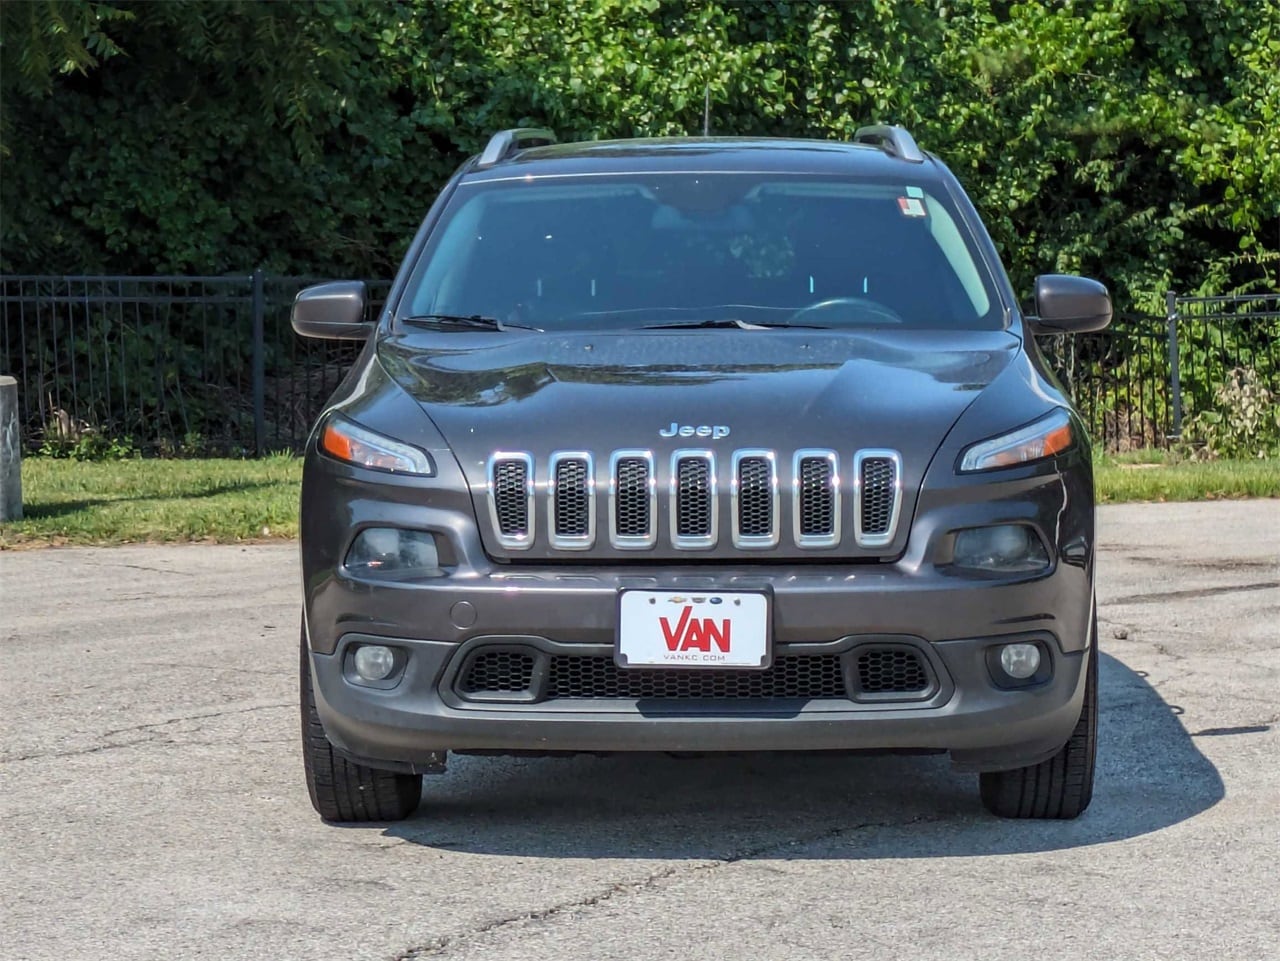 Used 2014 Jeep Cherokee Latitude with VIN 1C4PJMCS3EW272336 for sale in Kansas City